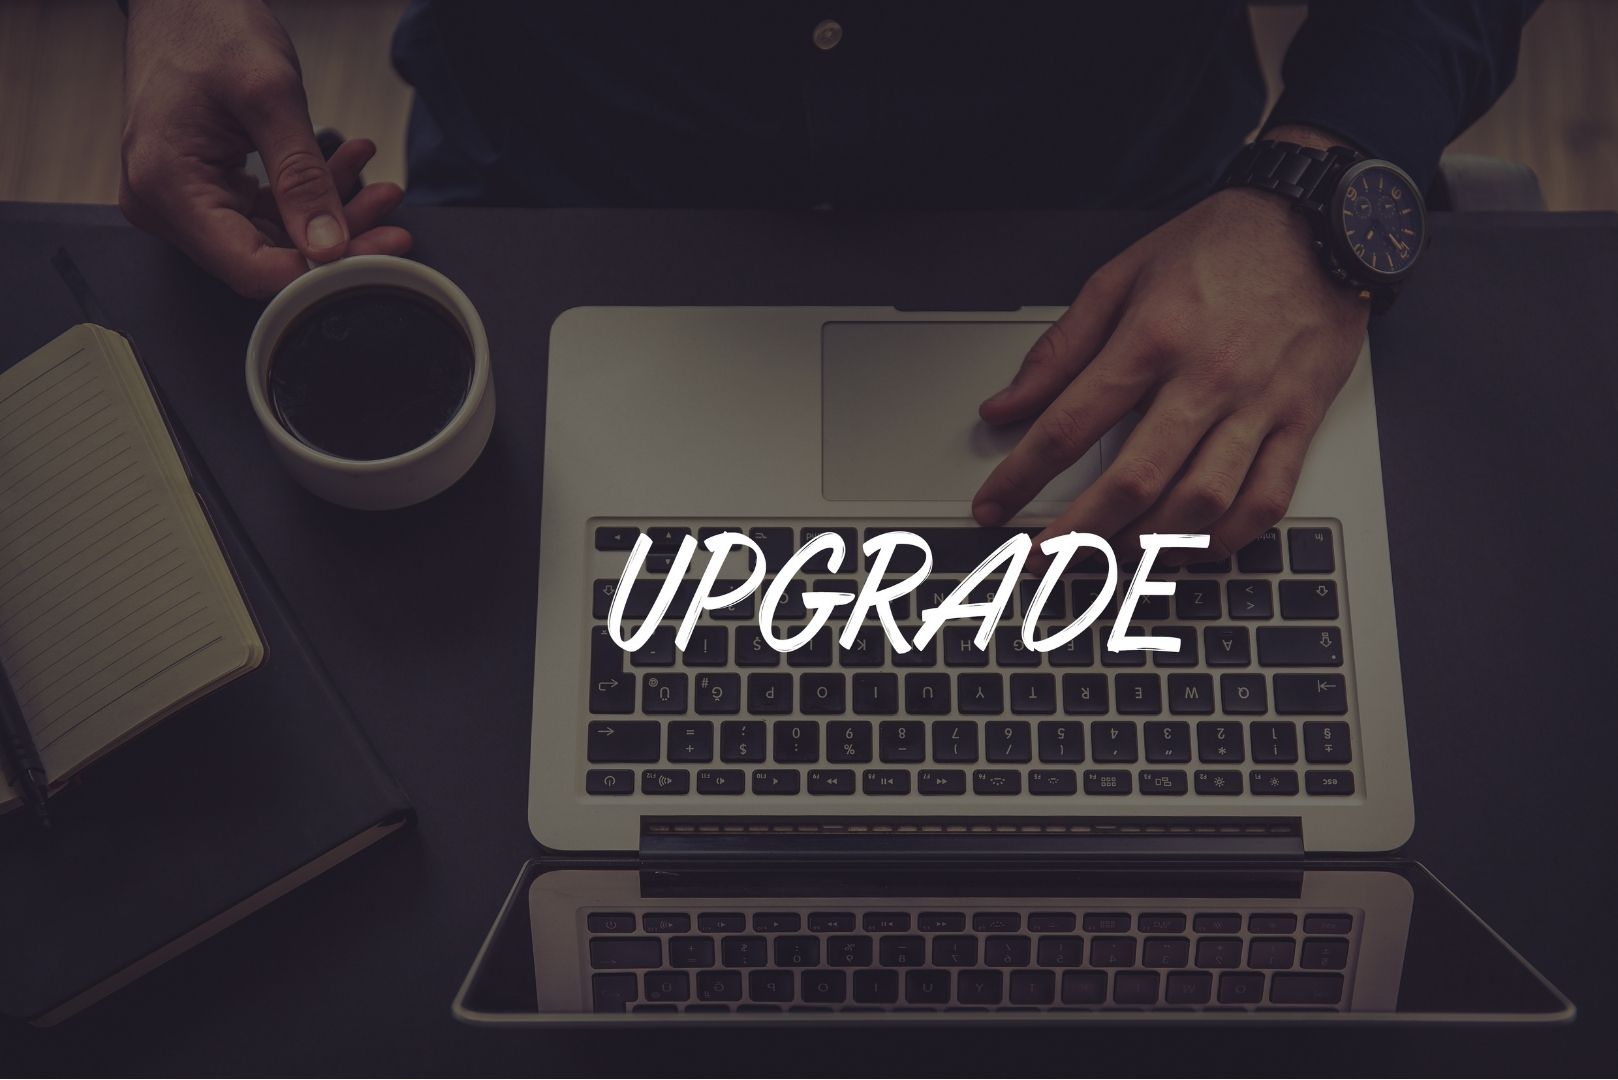 bird's eye view of man typing on mac with the word "Upgrade" overlaying the image